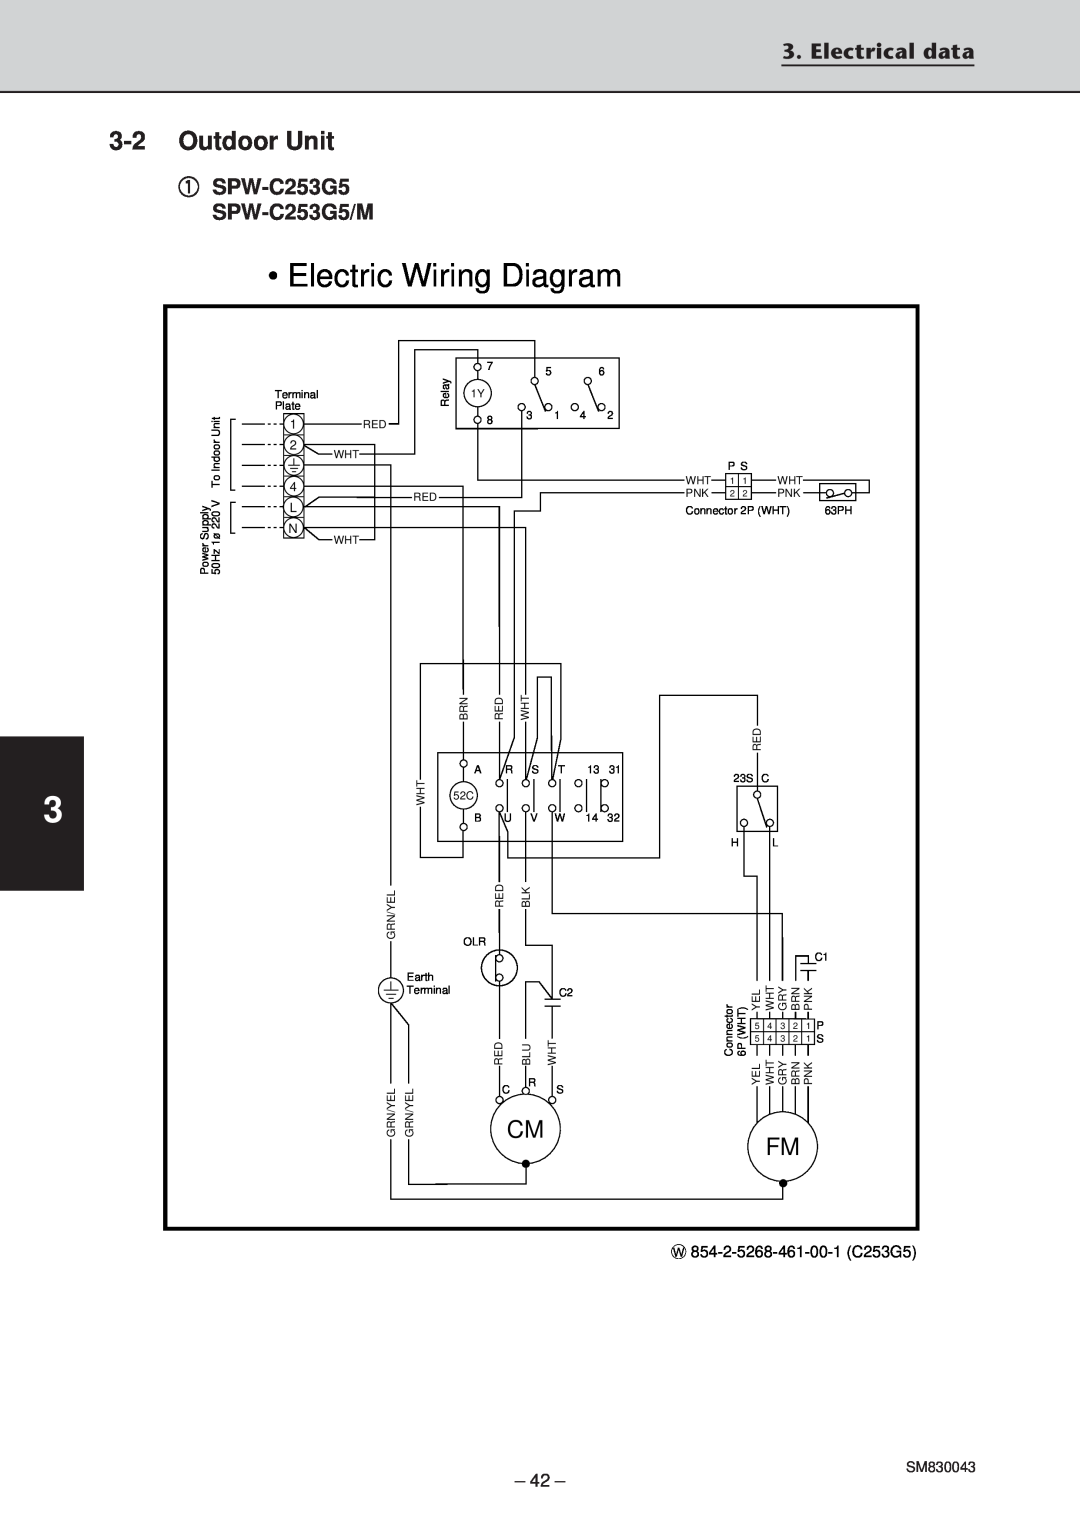 Sanyo SPW-C253G5, SPW-T363GS56, SPW-T483G56, SPW-T483GS56 Electric Wiring Diagram, 3-2Outdoor Unit, Electrical data 